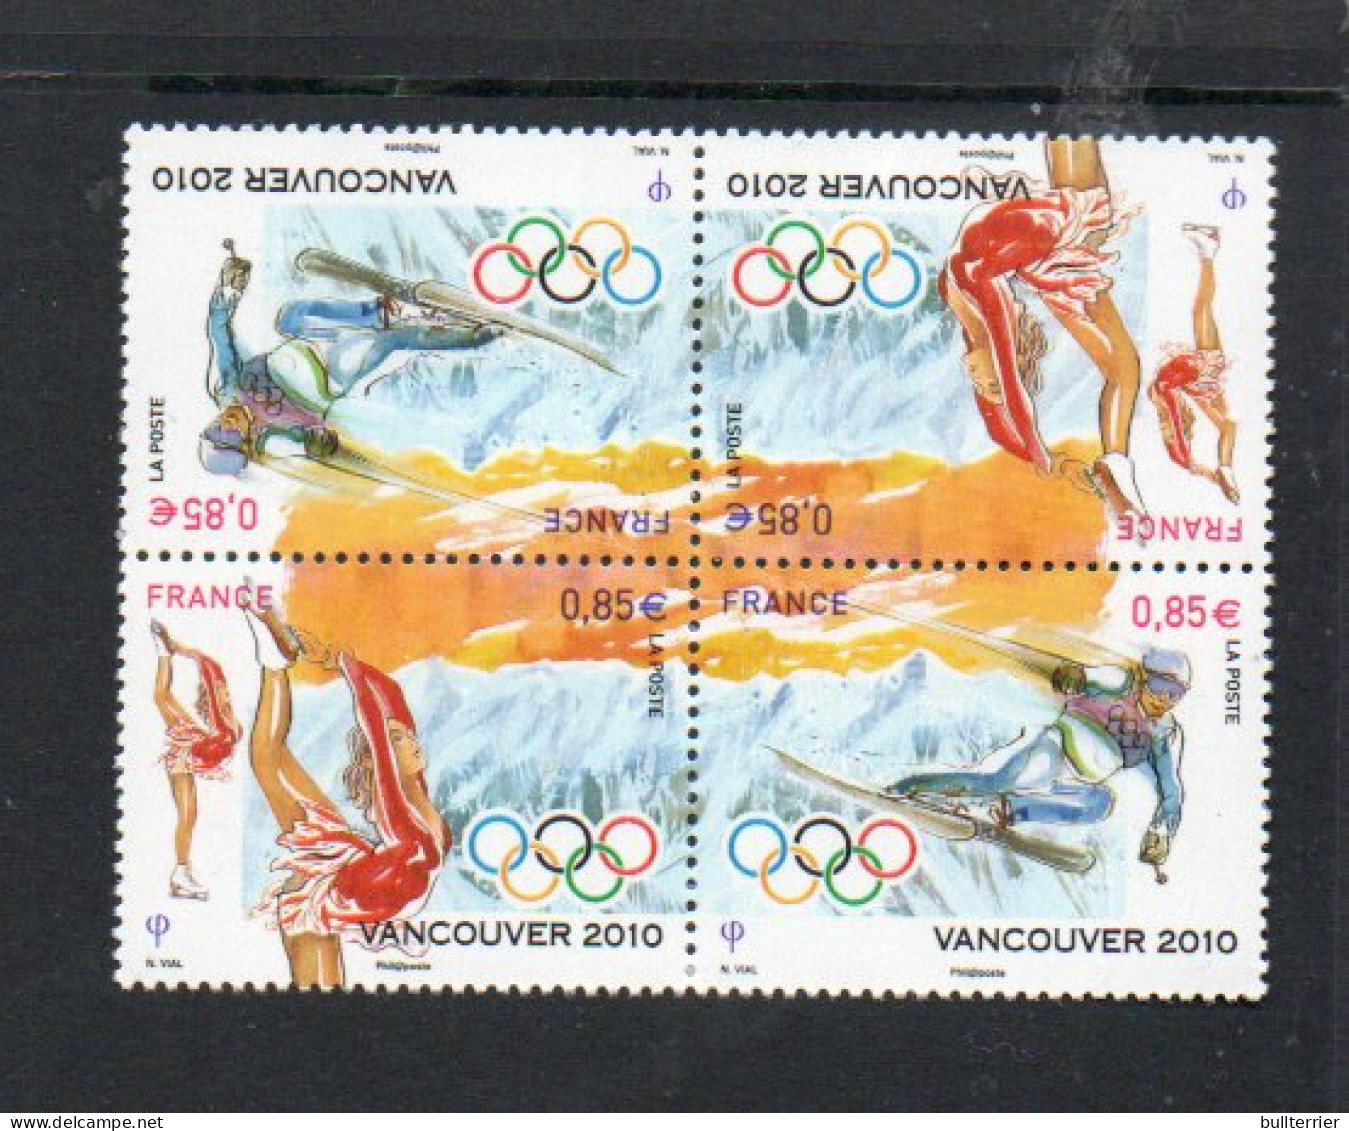 OLYMPICS - FRANCE -2010- VANCOUVER OLYMPCIS SET OF 2 IN SE TENANT BLOCK OF 4  MINT NEVER HINGED  SG CAT £16 - Winter 2010: Vancouver